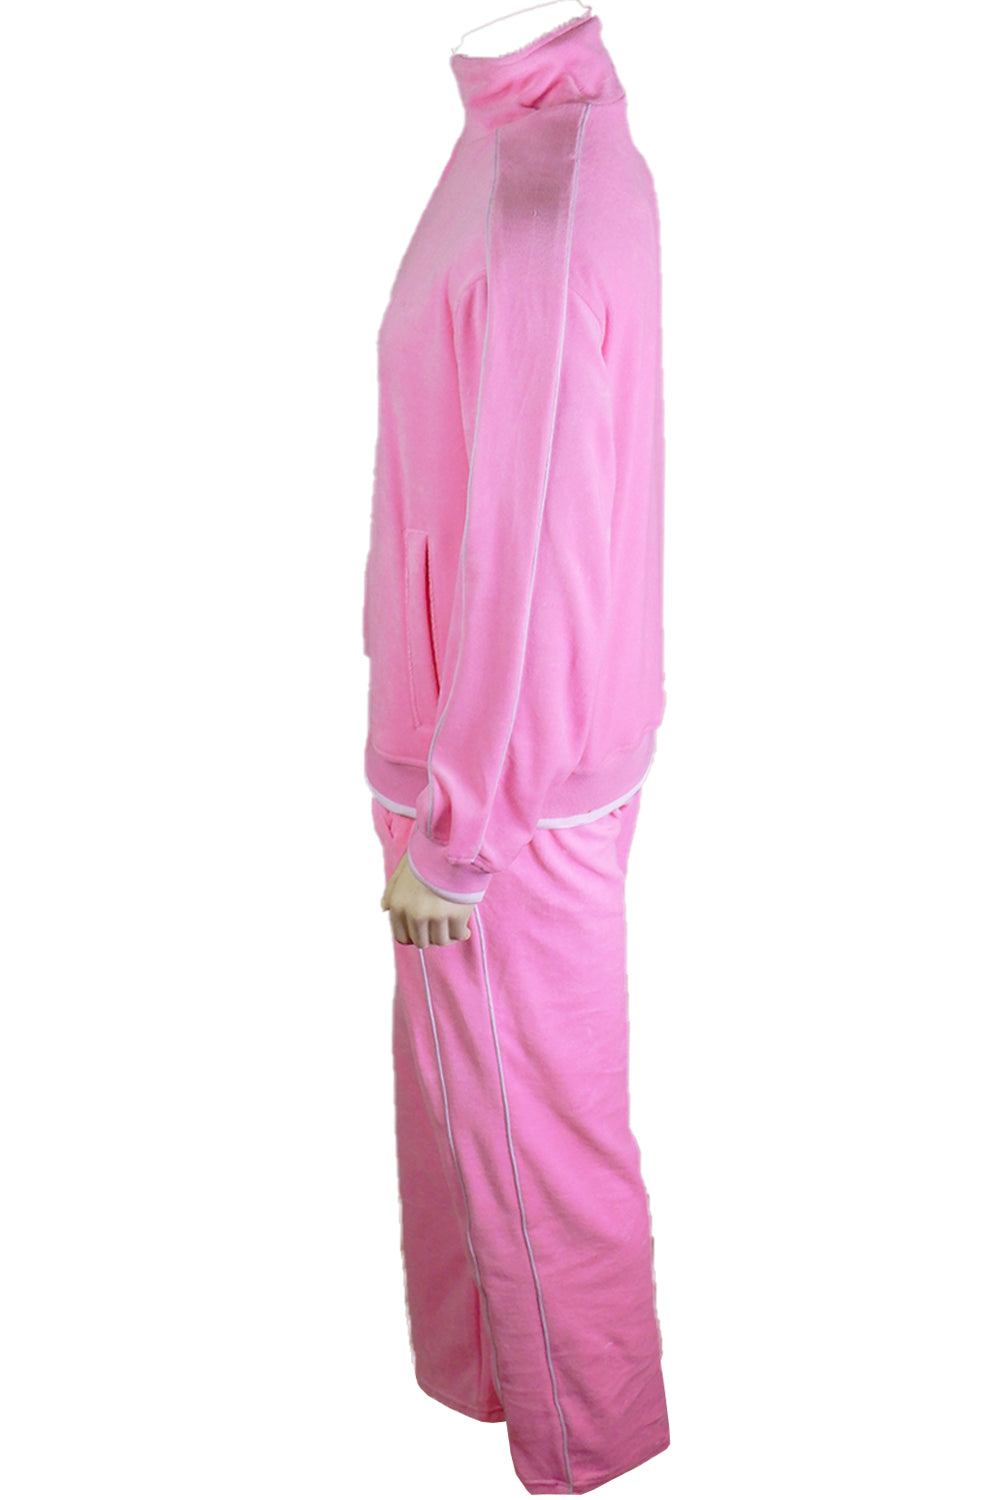 Mens Pink Velour Tracksuit with White Piping – Sweatsedo